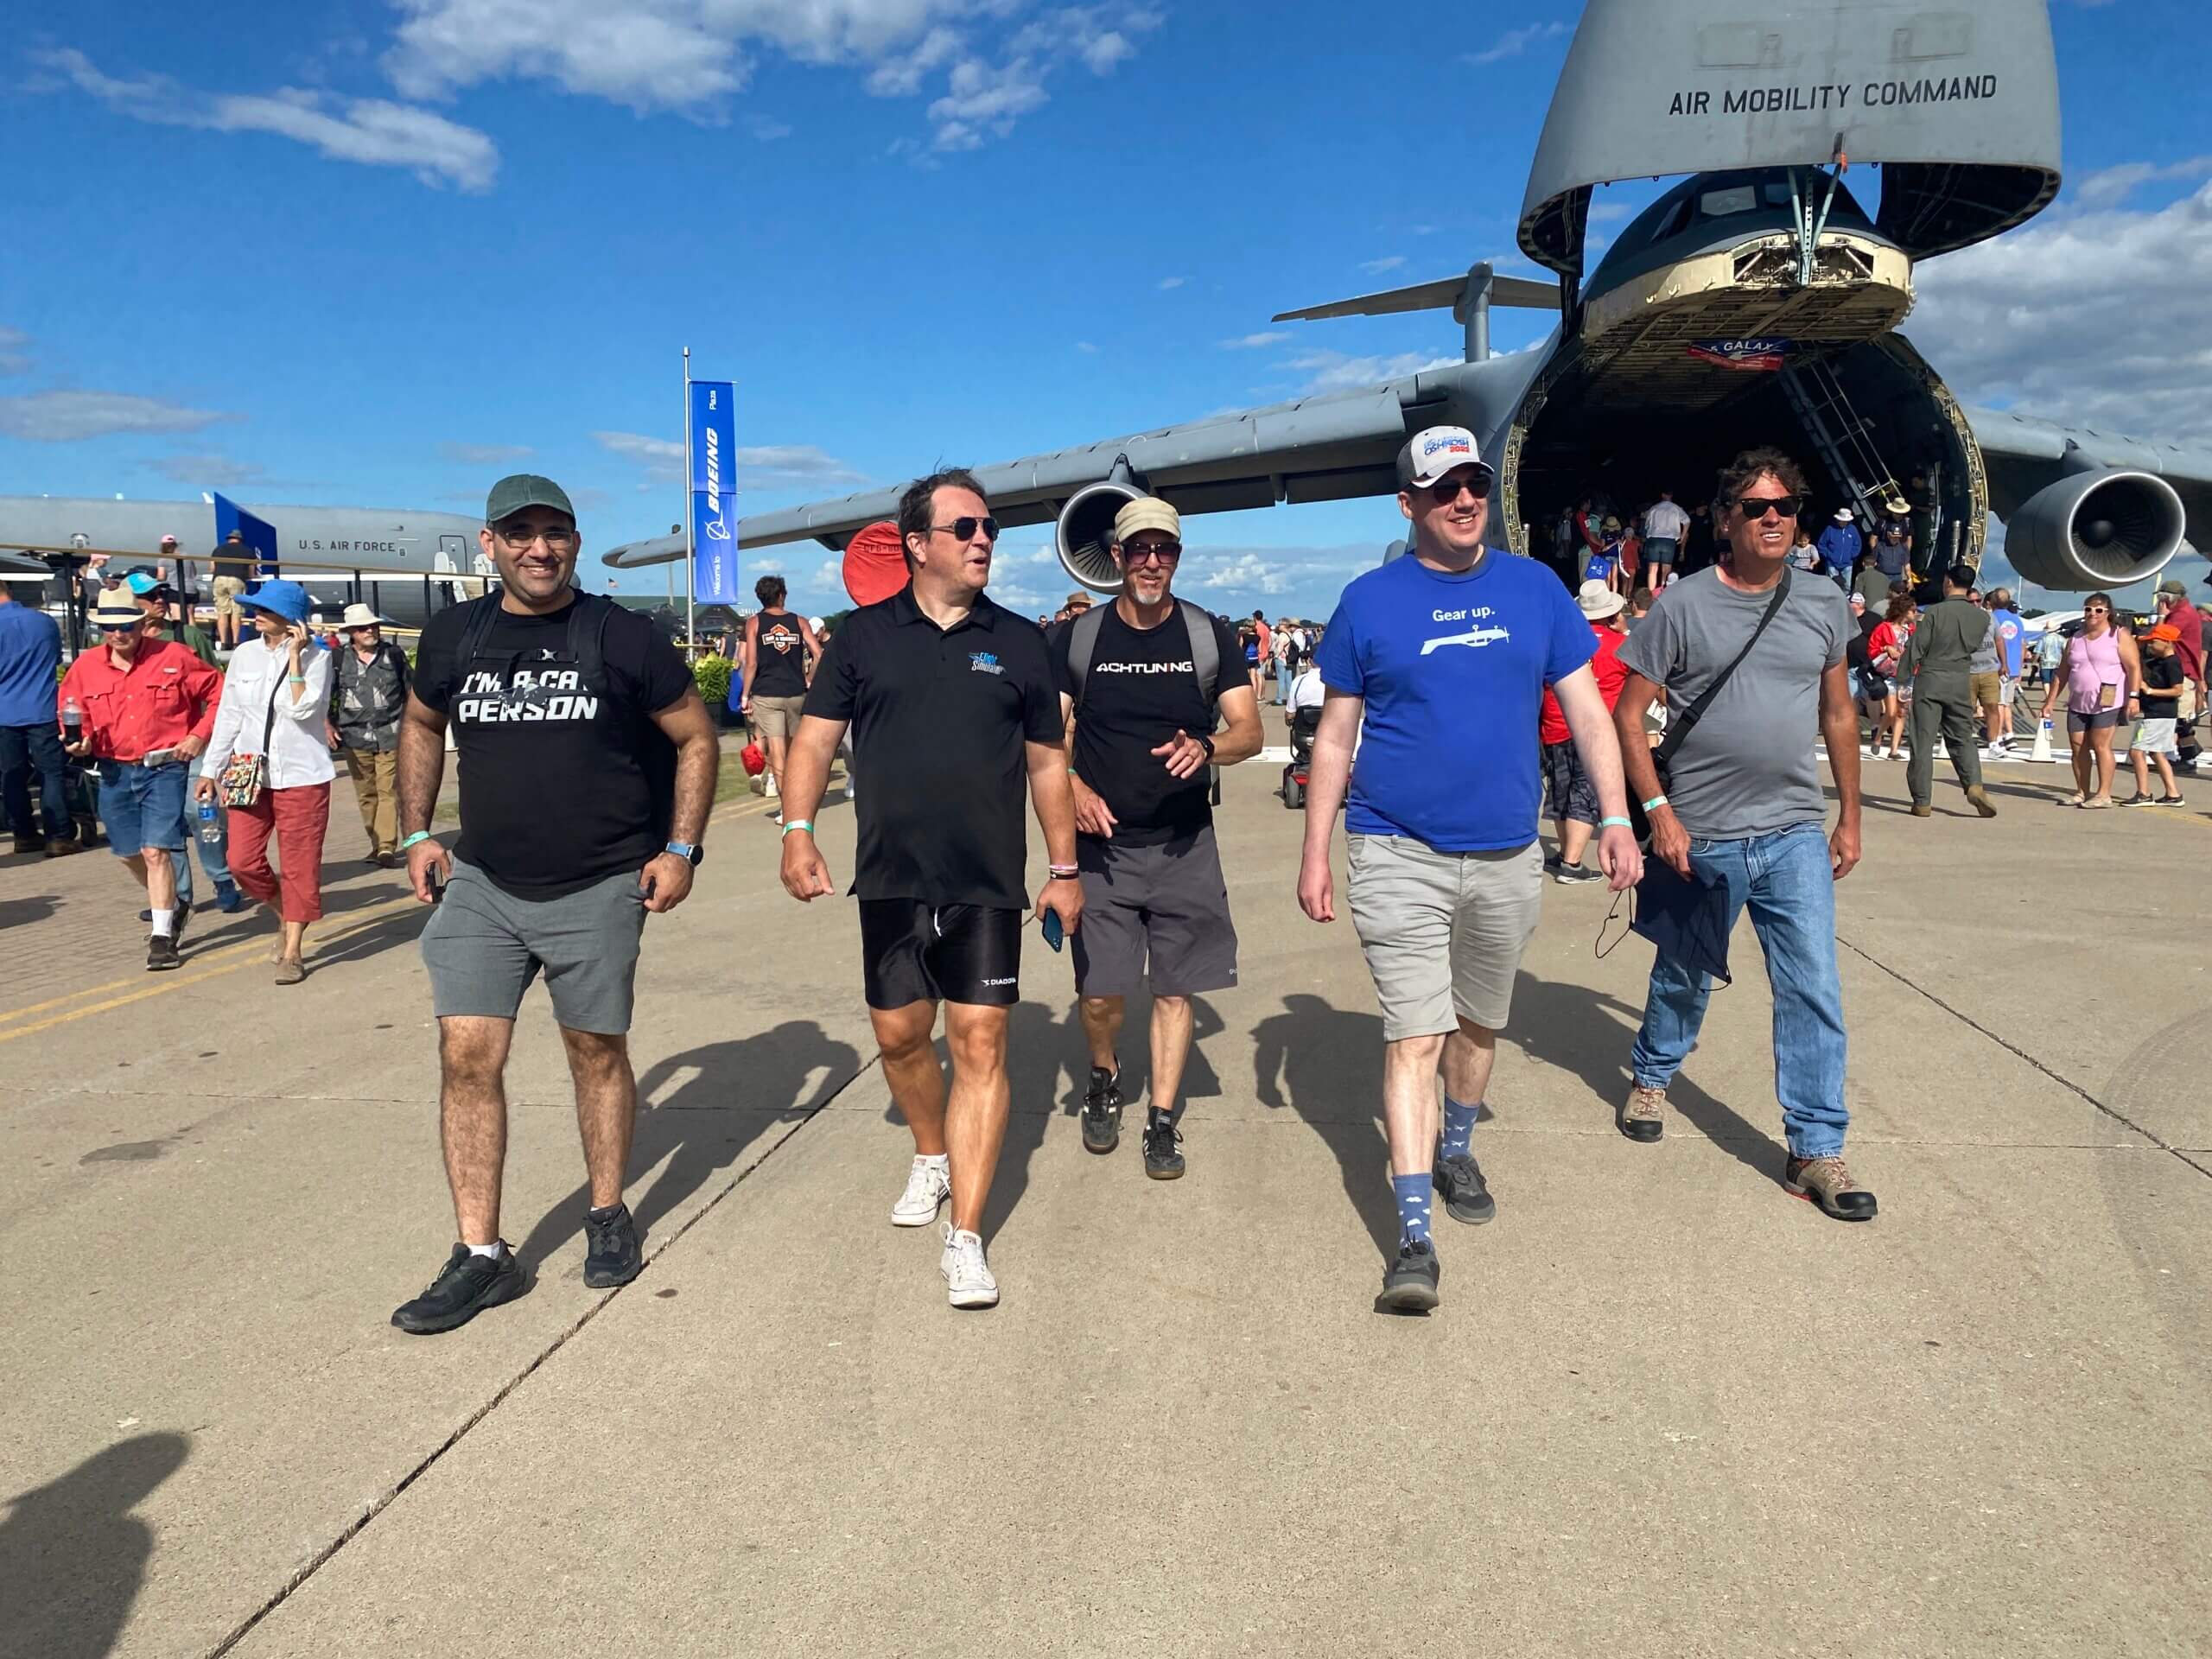 Members of the Microsoft Flight Simulator team walk towards the camera with a C-5 Galaxy military transport plane in the background